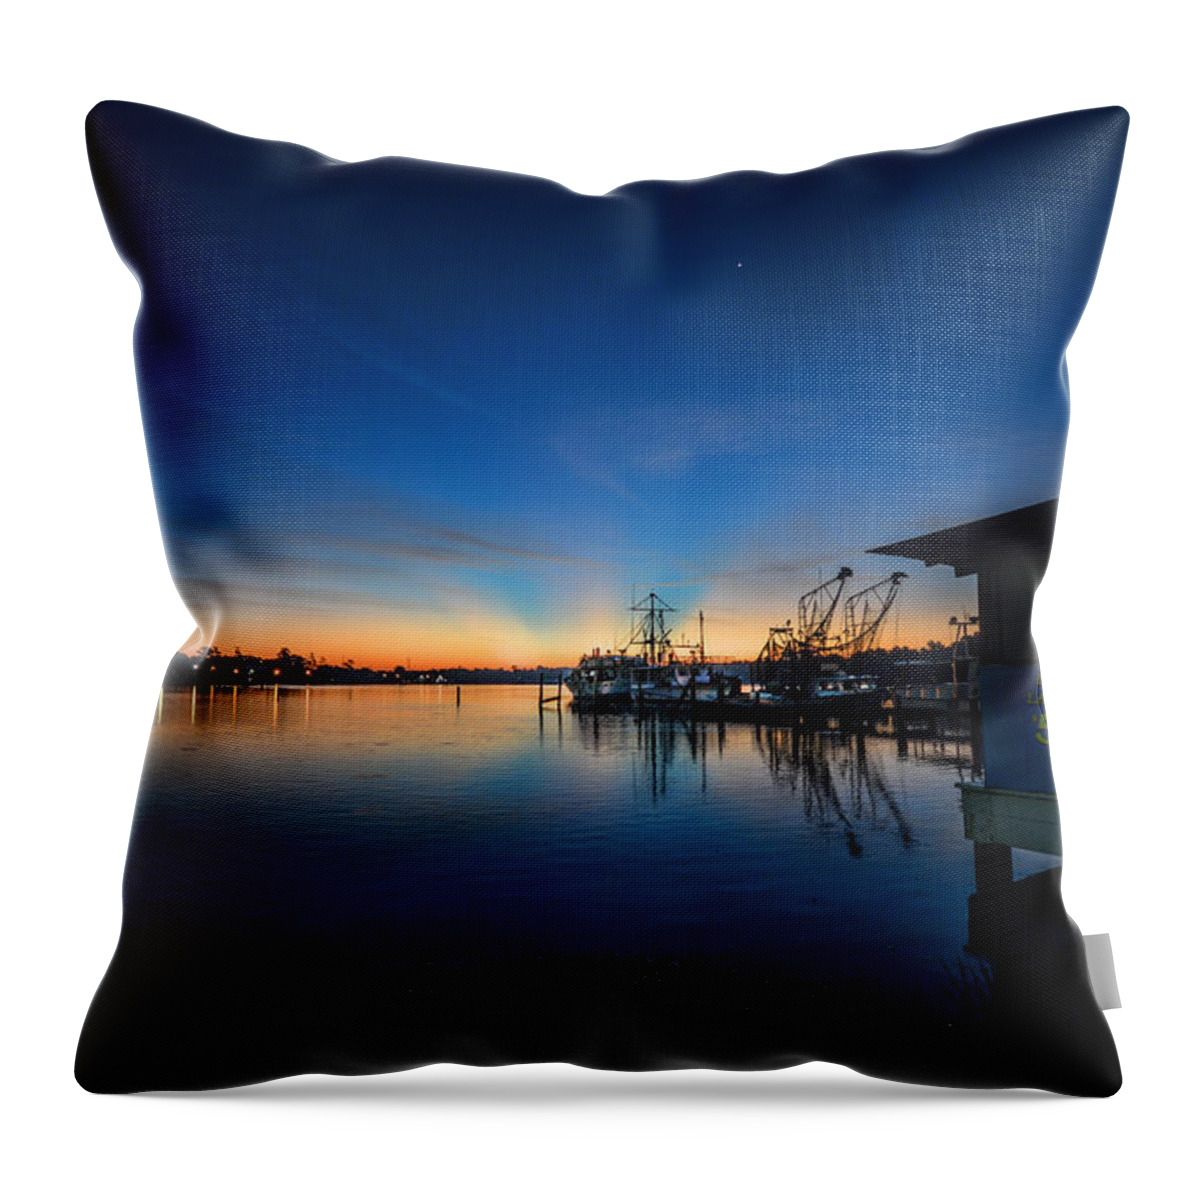 Bon Secour Throw Pillow featuring the photograph Billys Boat Launch Sunrise by Michael Thomas